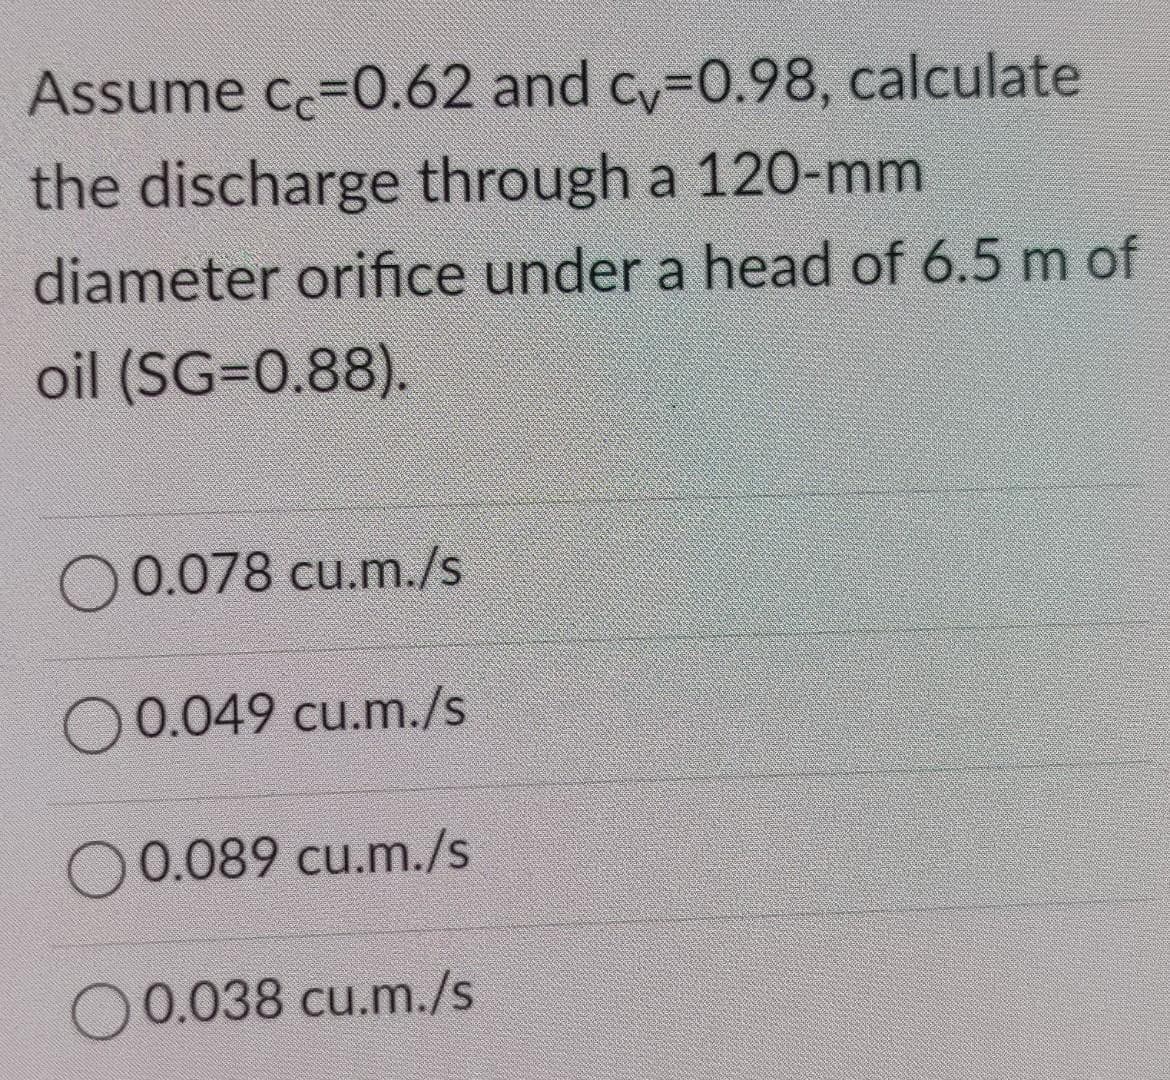 Assume cc=0.62 and cy-0.98, calculate
the discharge through a 120-mm
diameter orifice under a head of 6.5 m of
oil (SG=0.88).
O0.078 cu.m./s
O 0.049 cu.m./s
O 0.089 cu.m./s
O0.038 cu.m./s
